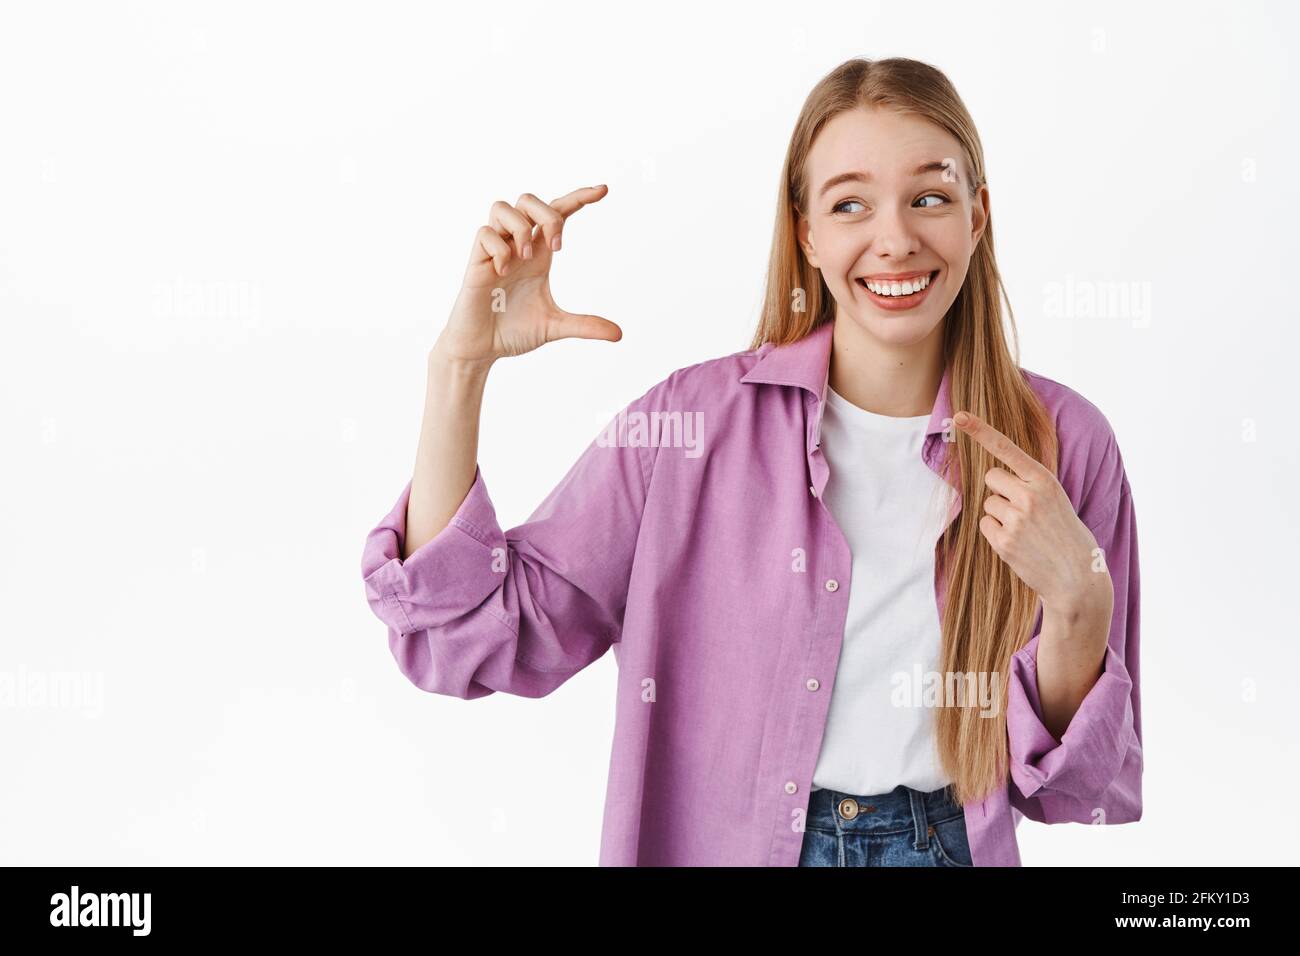 Blond woman holding something small and finy. Girl laughing while pointing at her hand showing little size tiny thing, smiling, standing against white Stock Photo